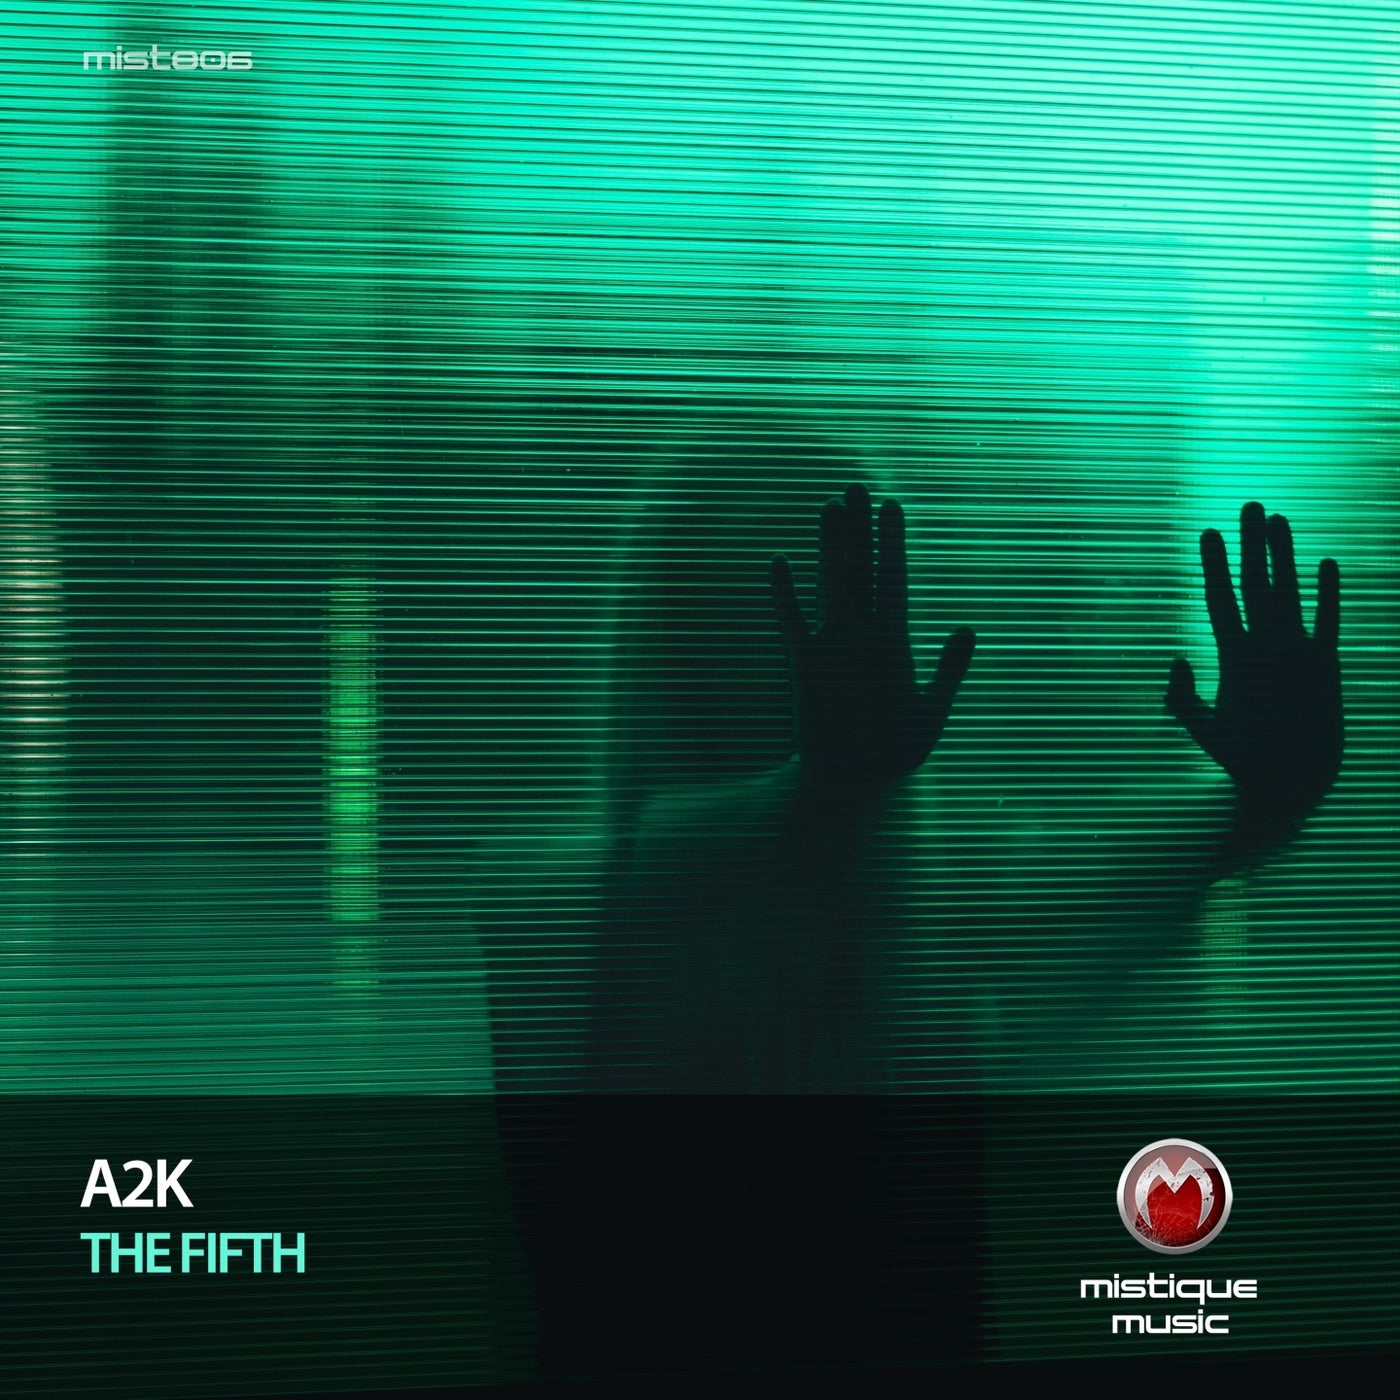 A2k – The Fifth [MIST806]